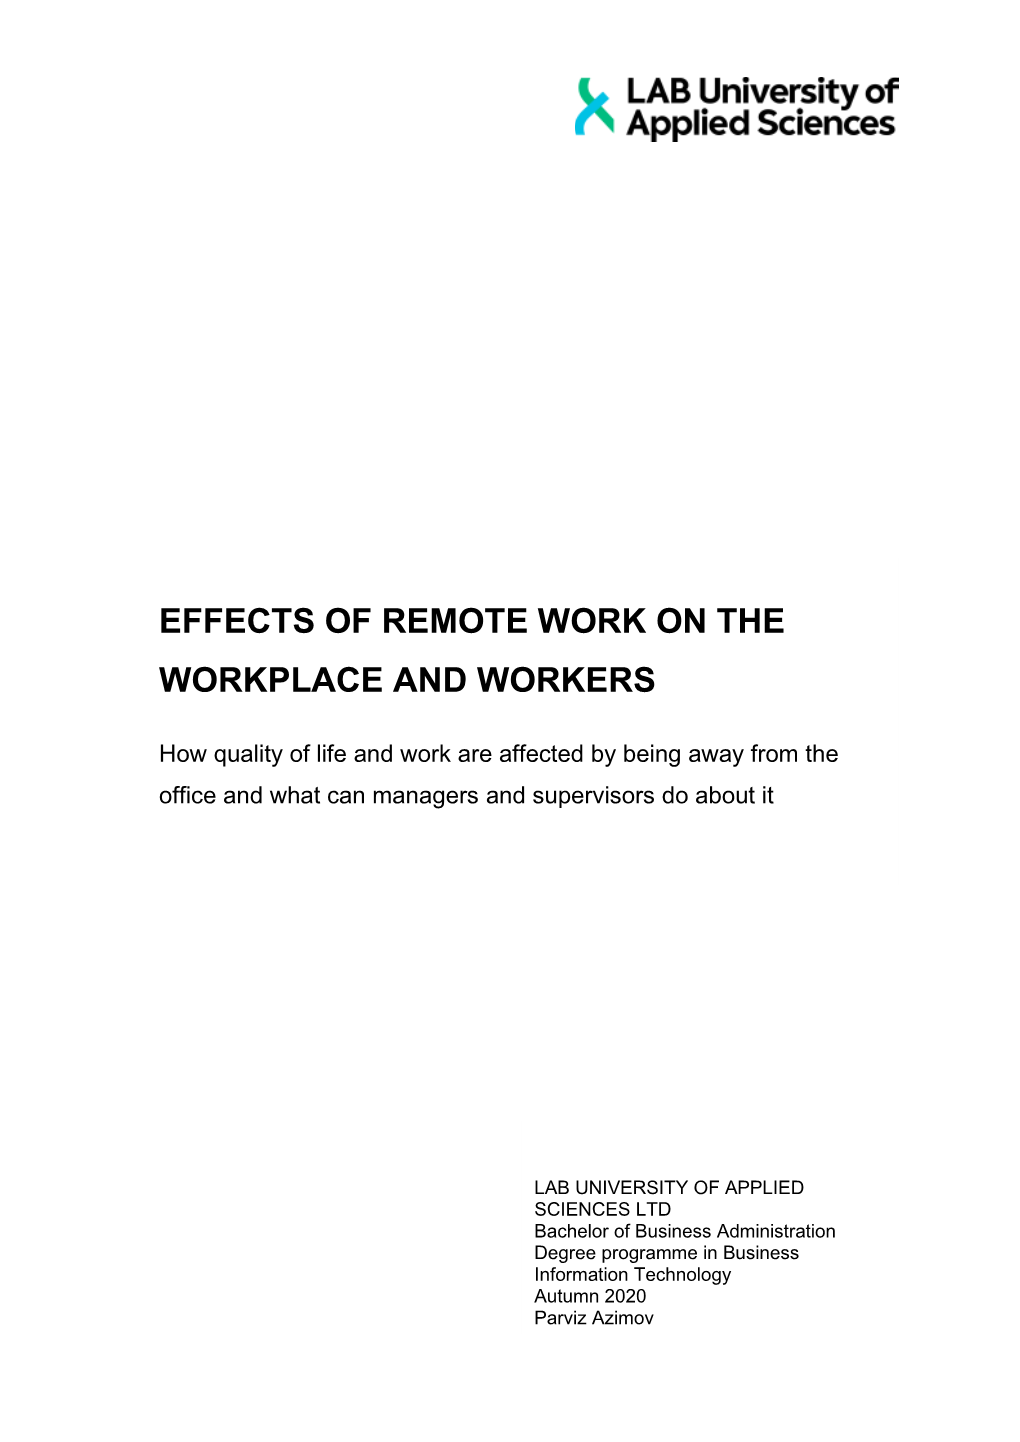 Effects of Remote Work on the Workplace and Workers